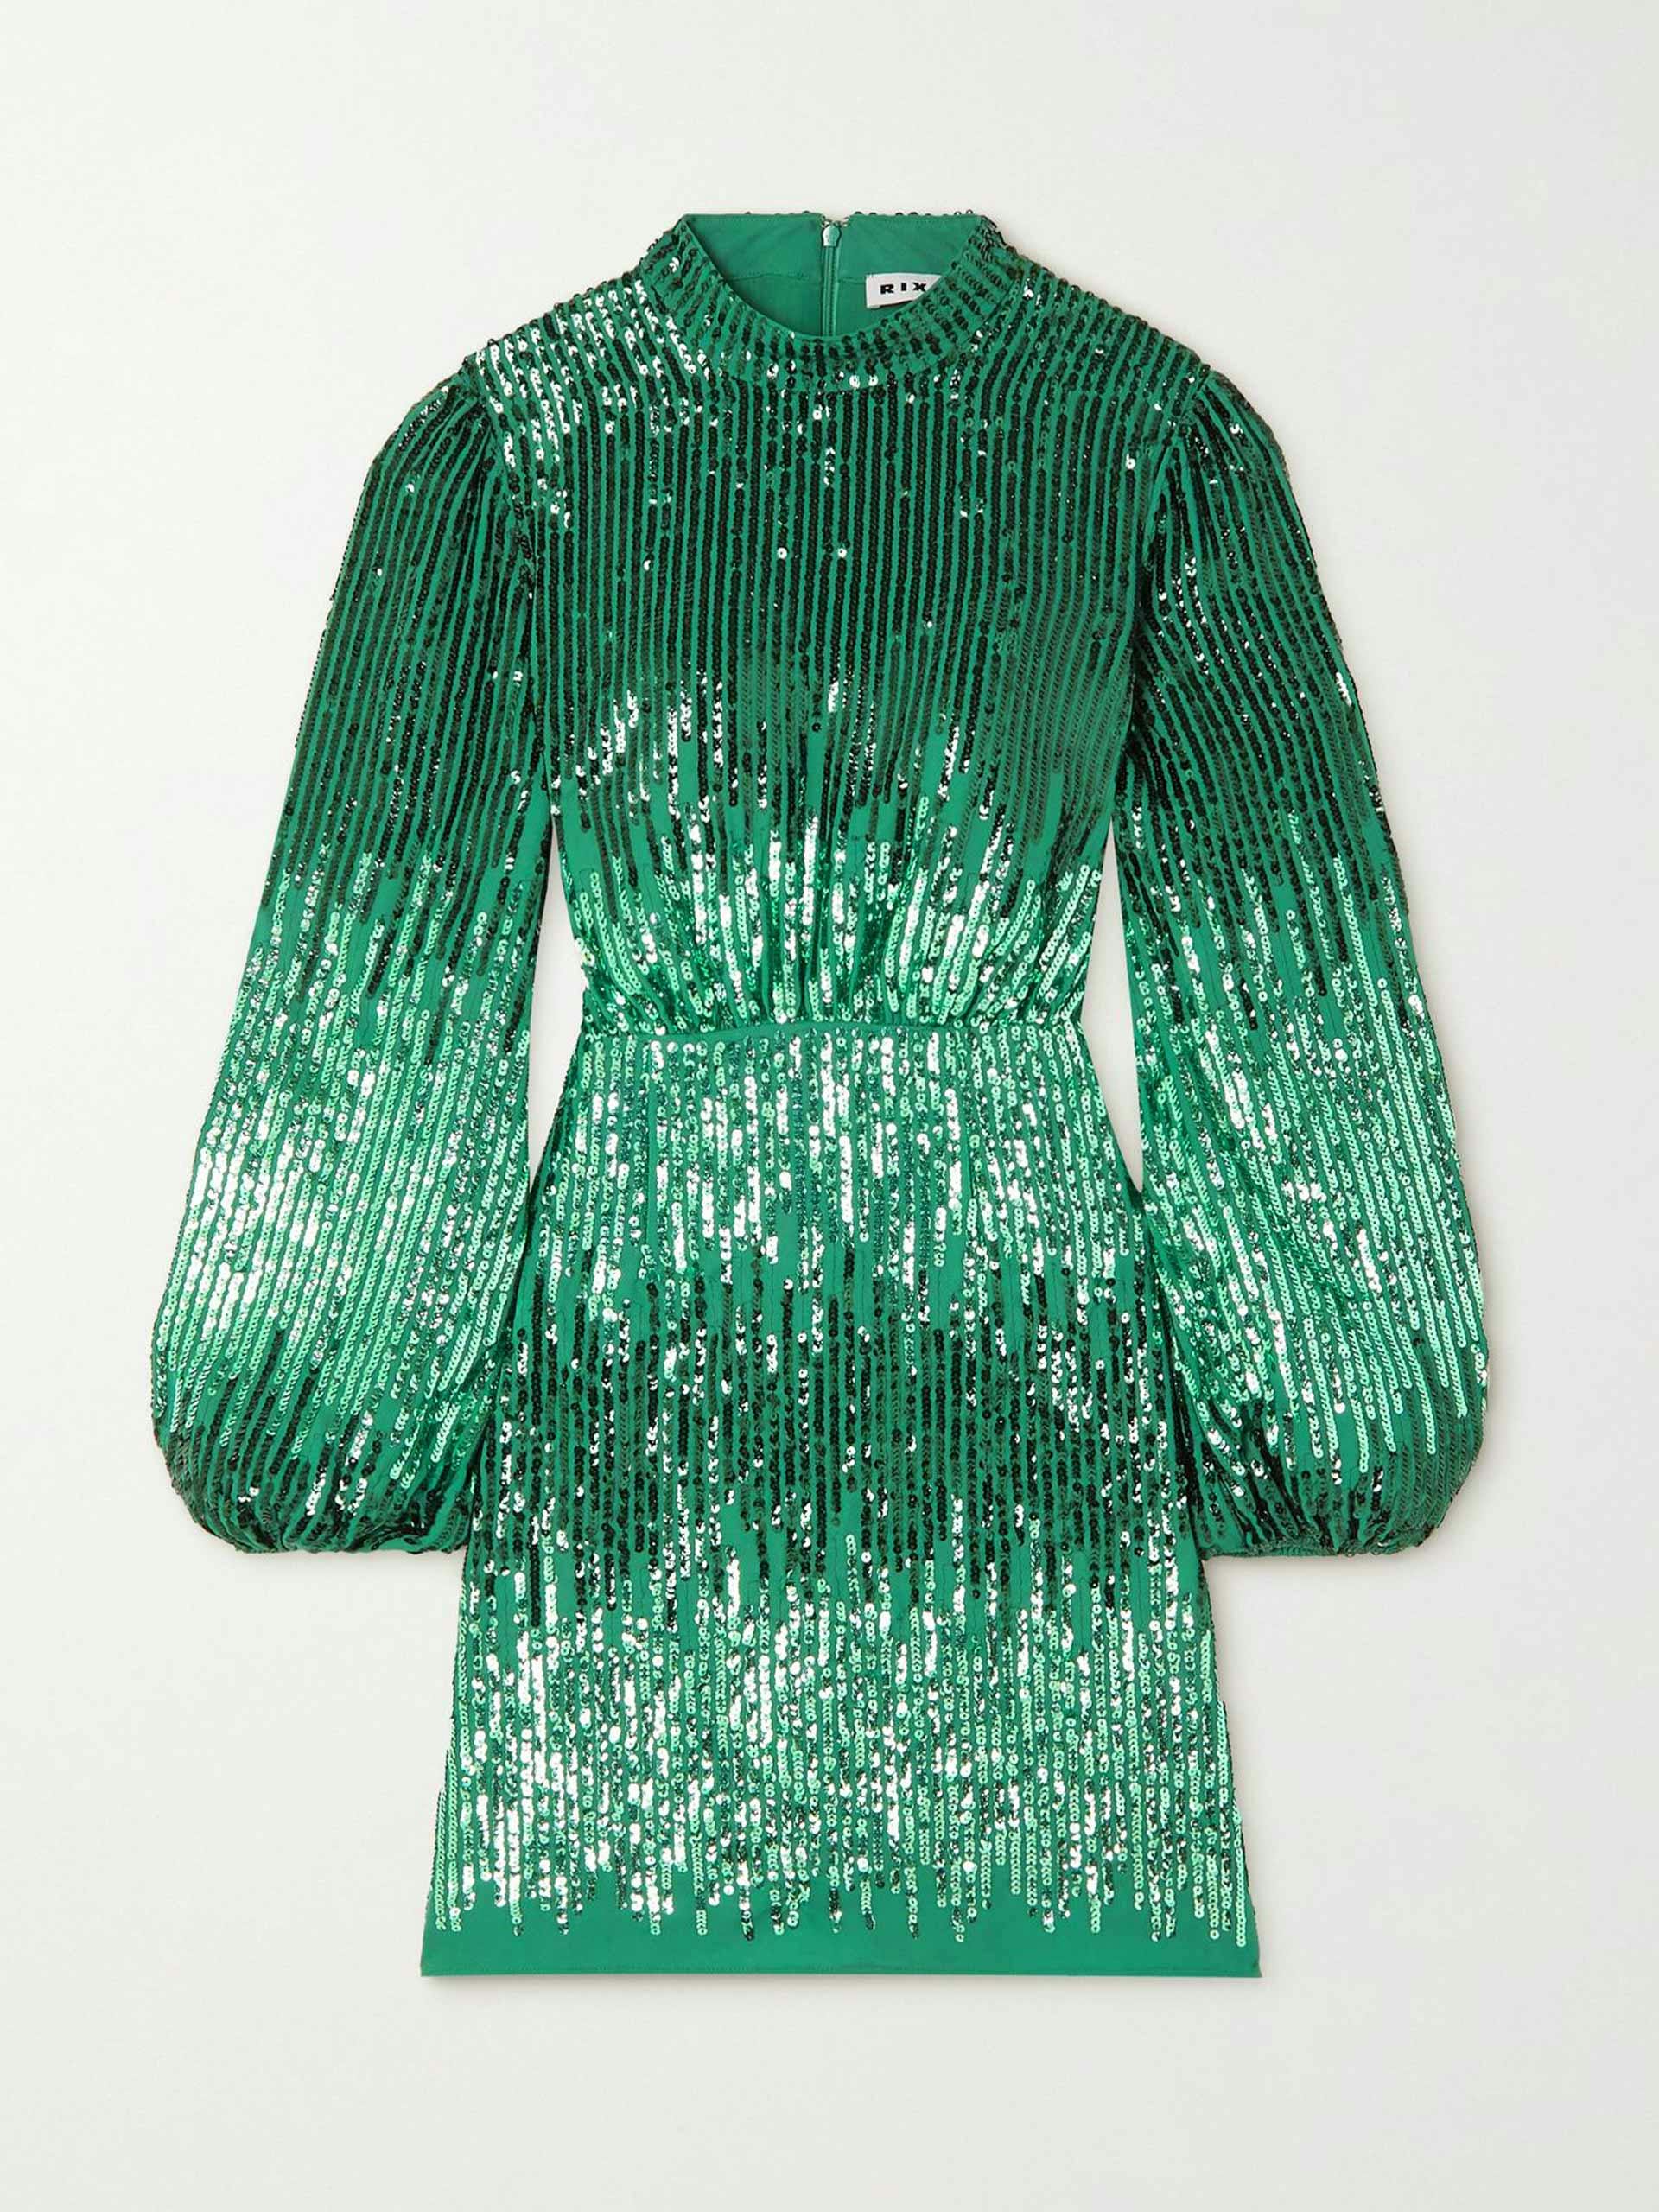 Green mini dress with sequins